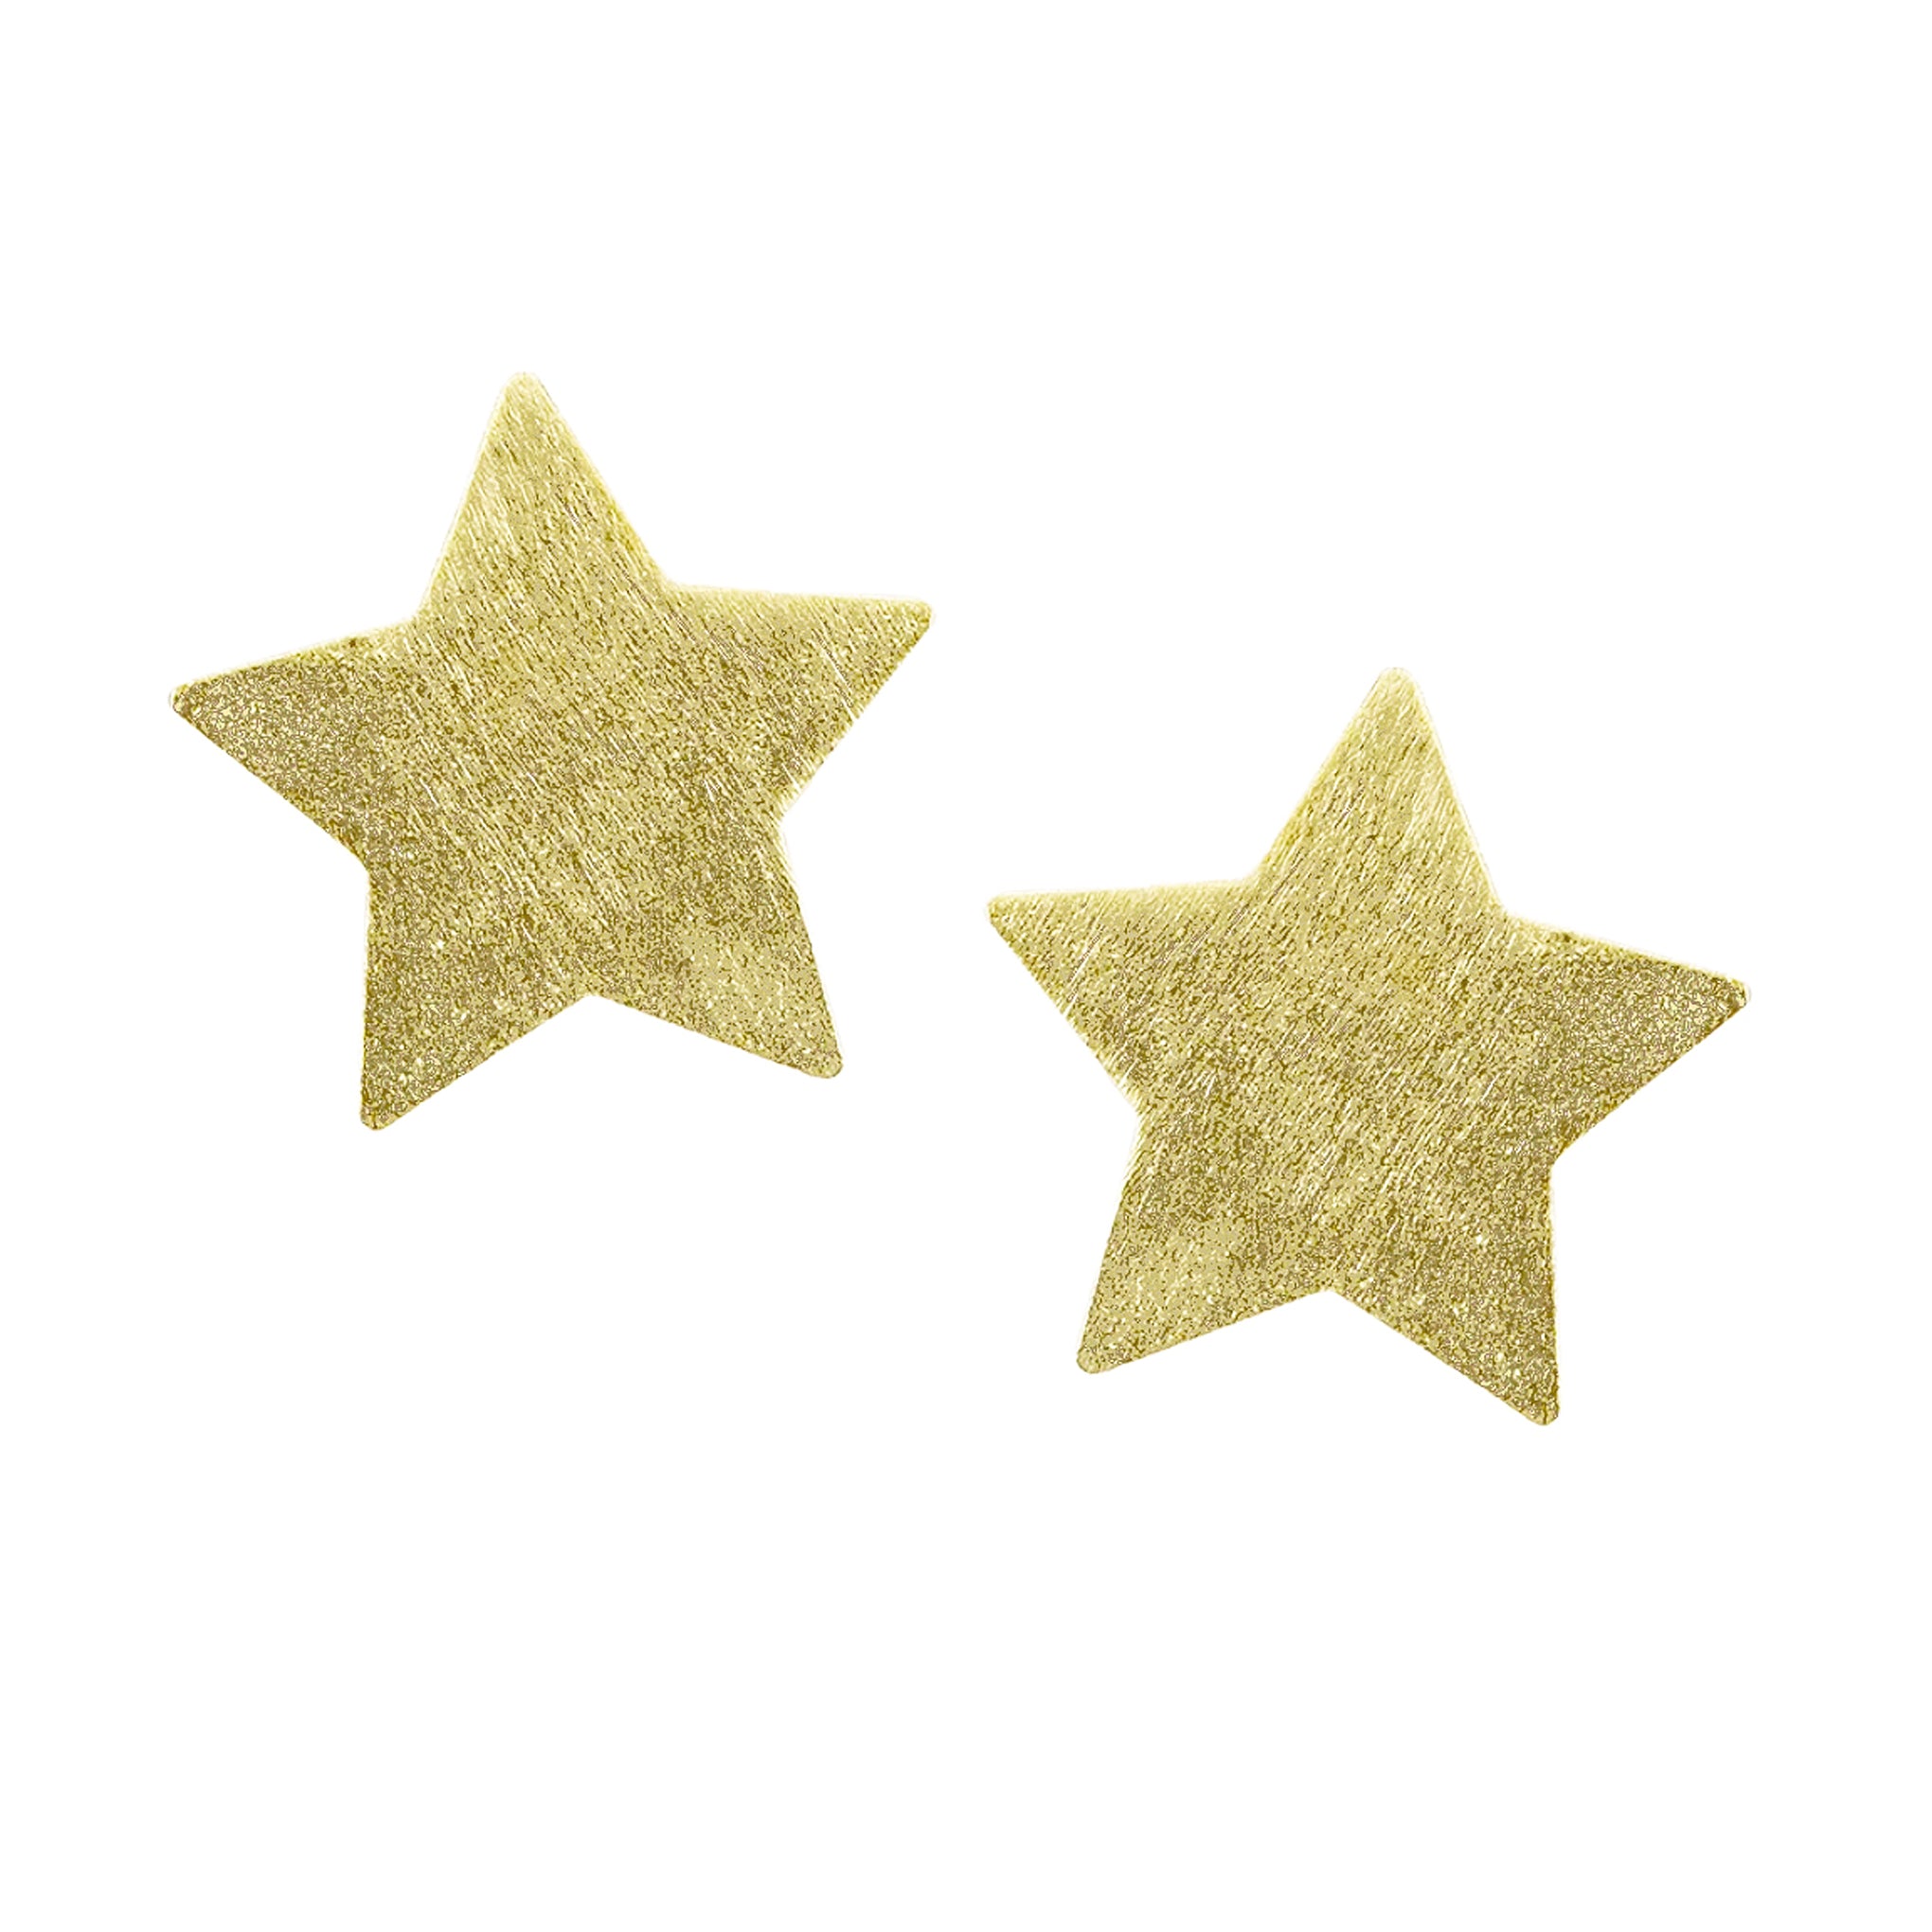 image of Sheila Fajl Lana Star Stud Earrings in Brushed Gold Plated